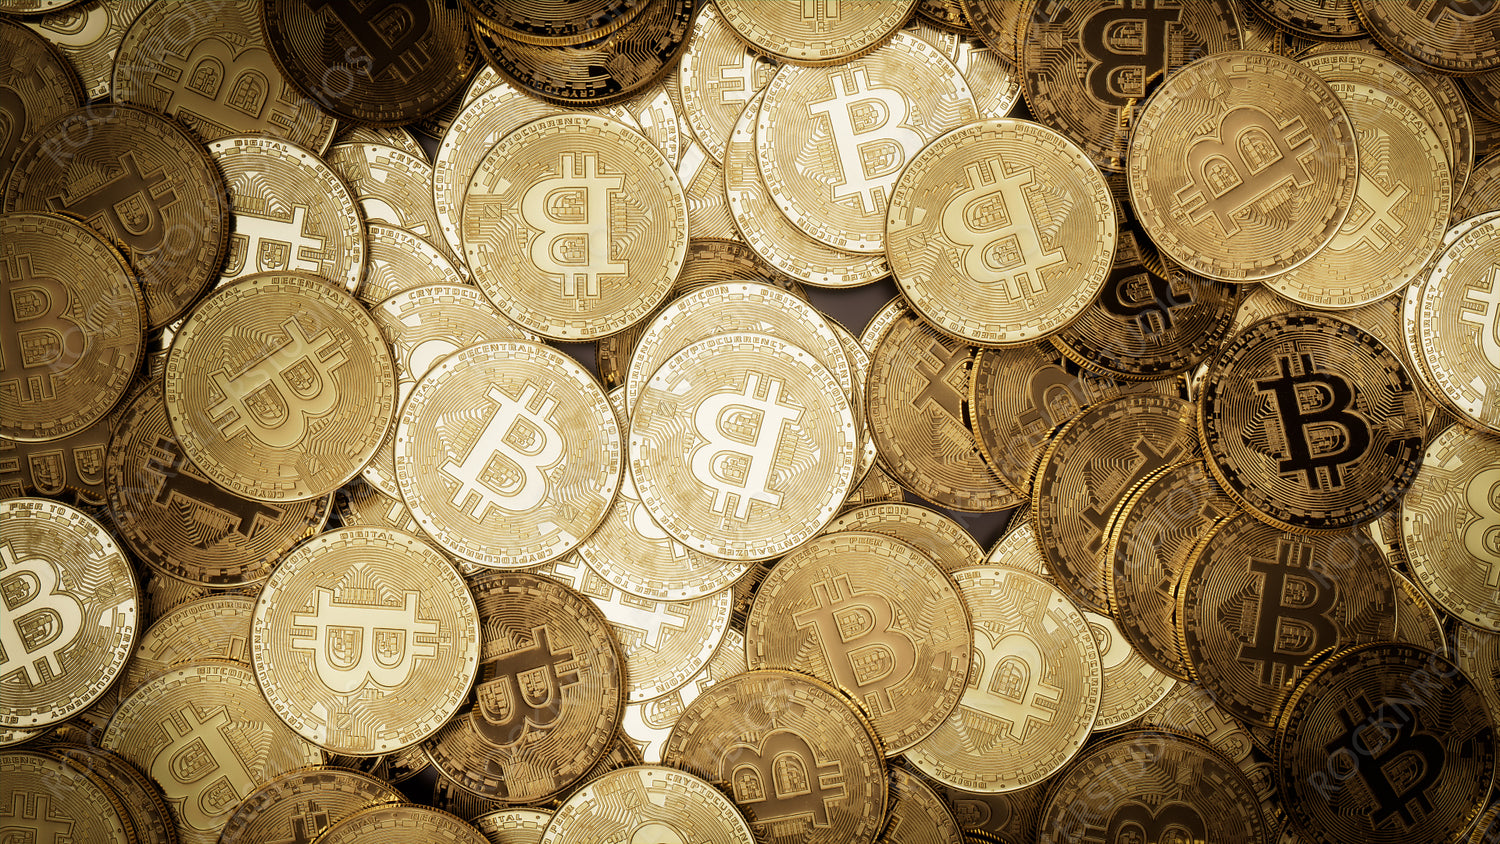 Bitcoin Cryptocurrency represented as Gold Coins. Future Money Background. 3D Render.